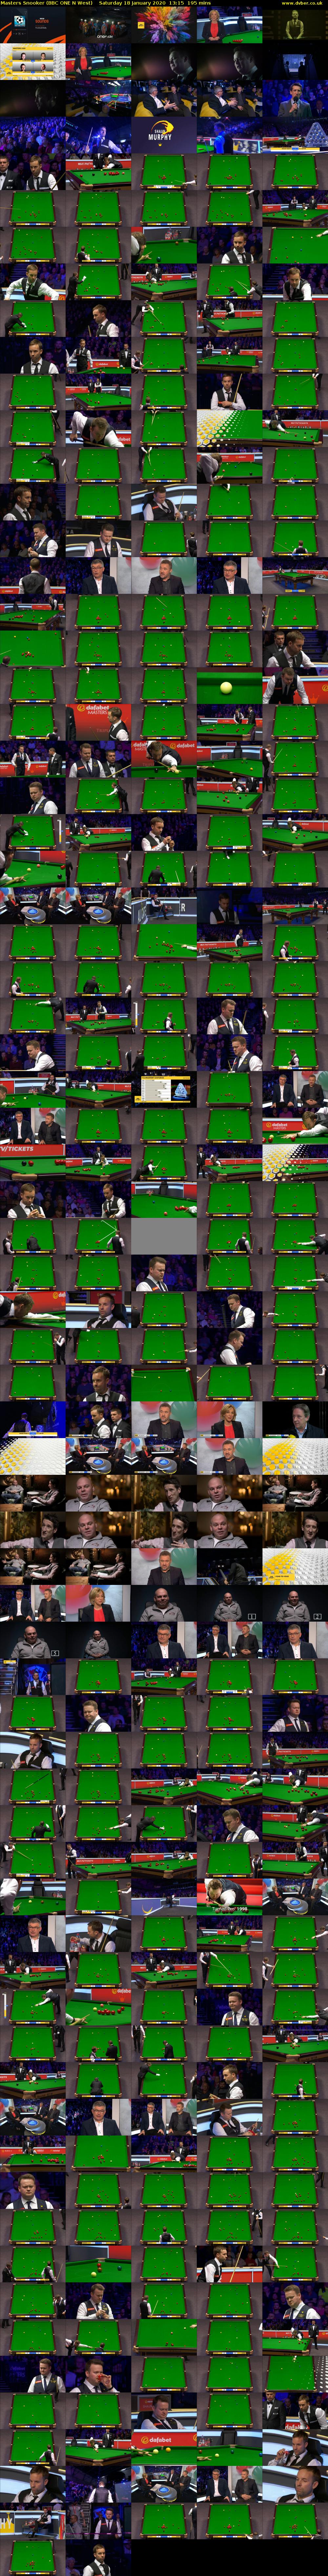 Masters Snooker (BBC ONE N West) Saturday 18 January 2020 13:15 - 16:30